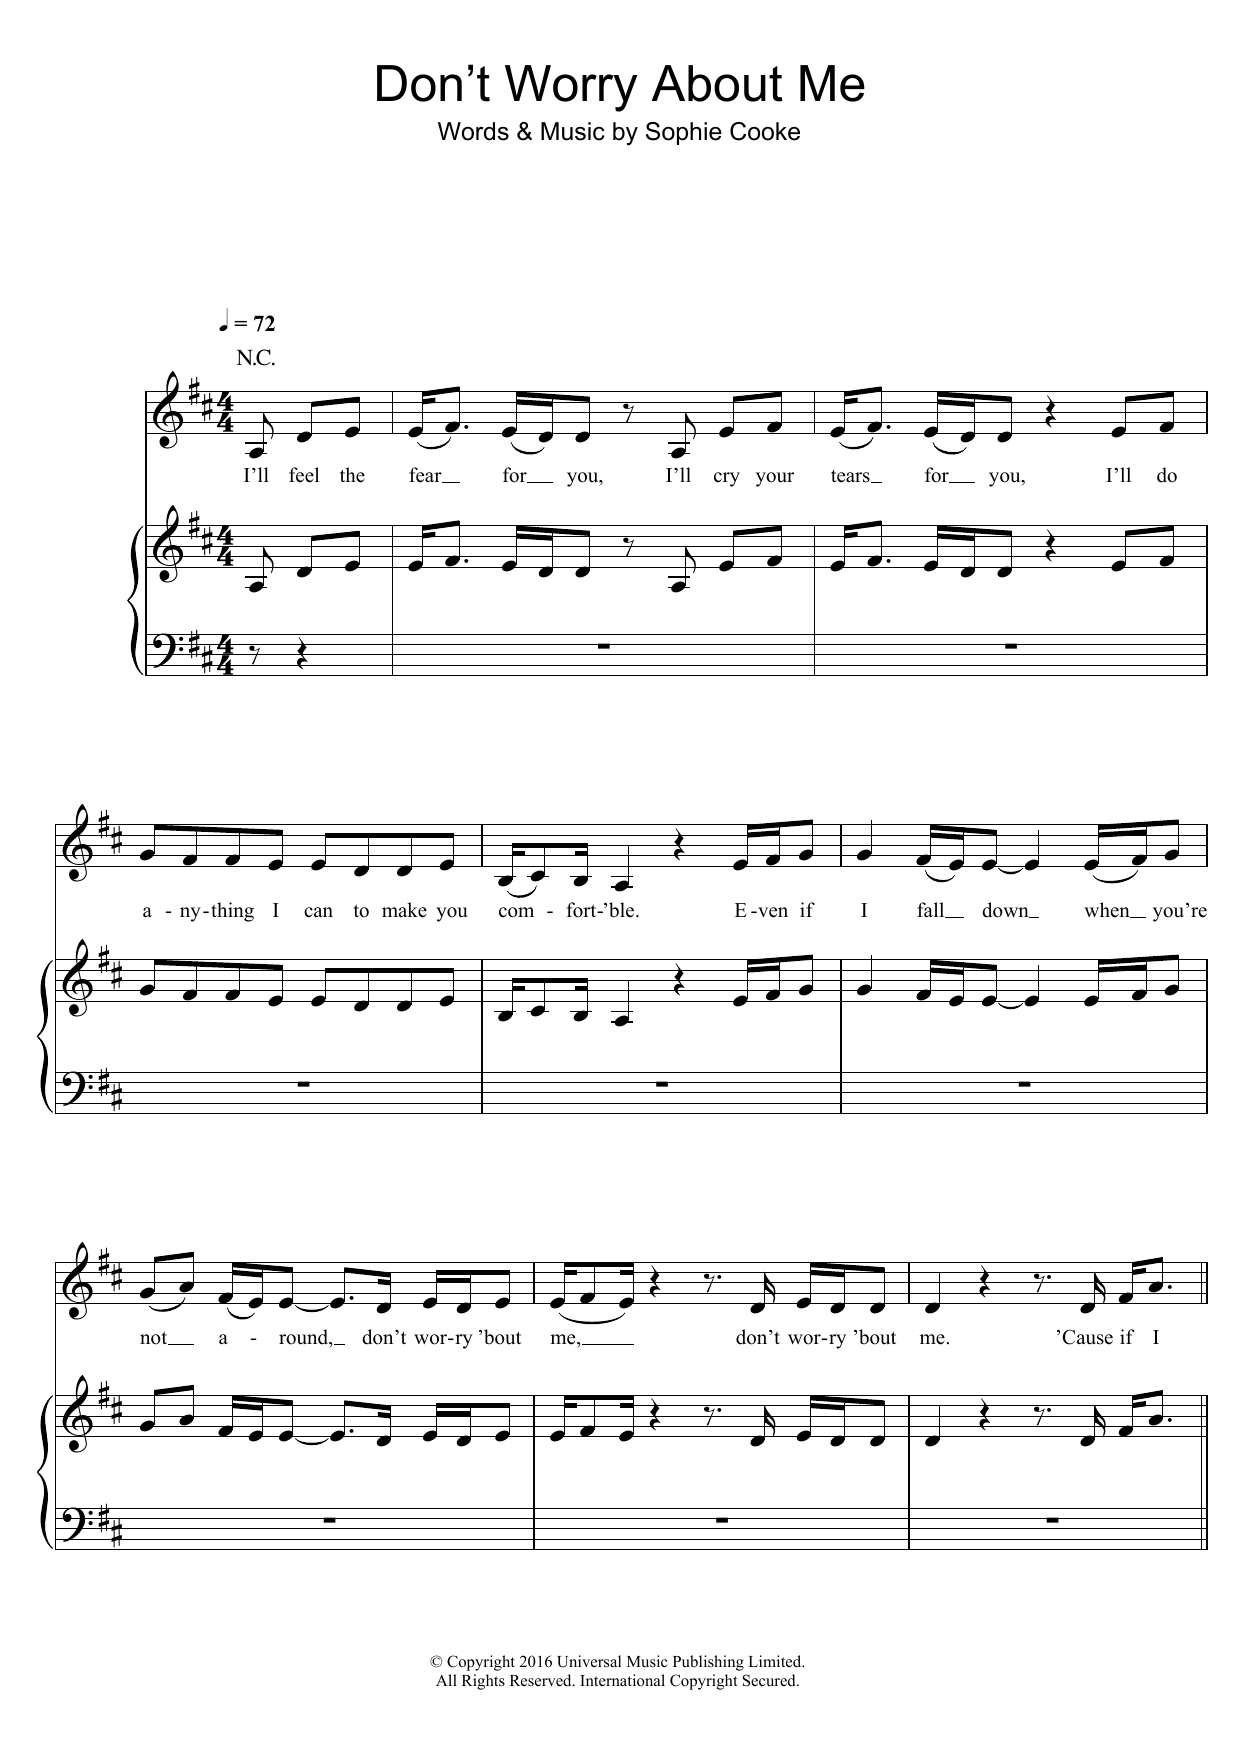 Download Frances Don't Worry About Me Sheet Music